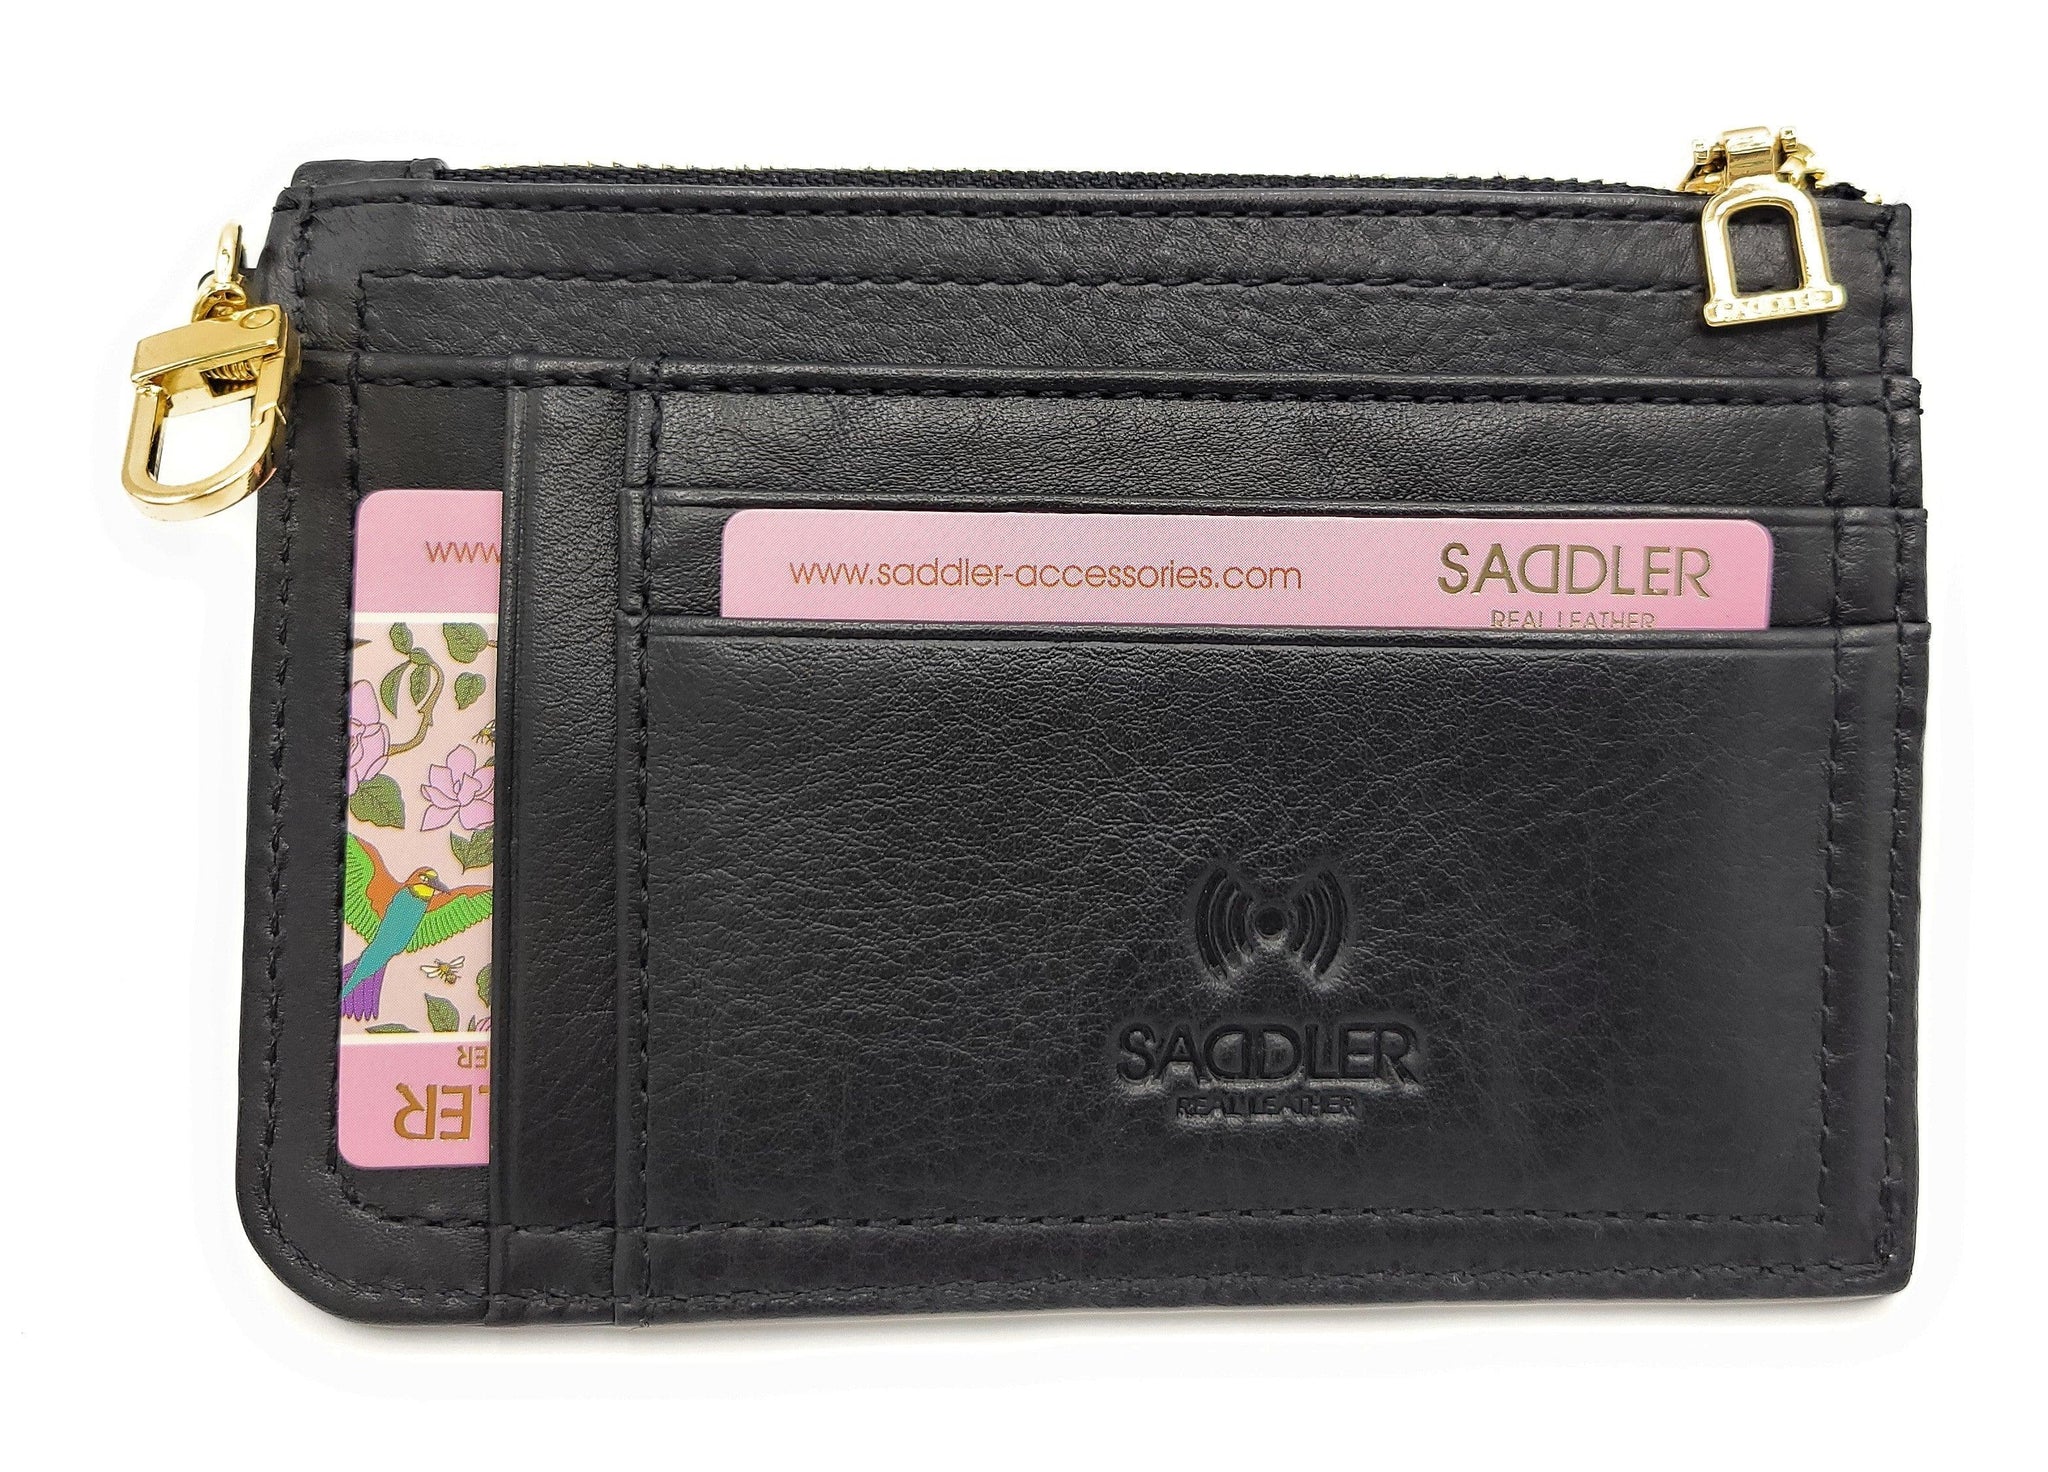 SADDLER "Piper" Leather Top Zip Card Holder| Gift Boxed | SADDLER ACCESSORIES